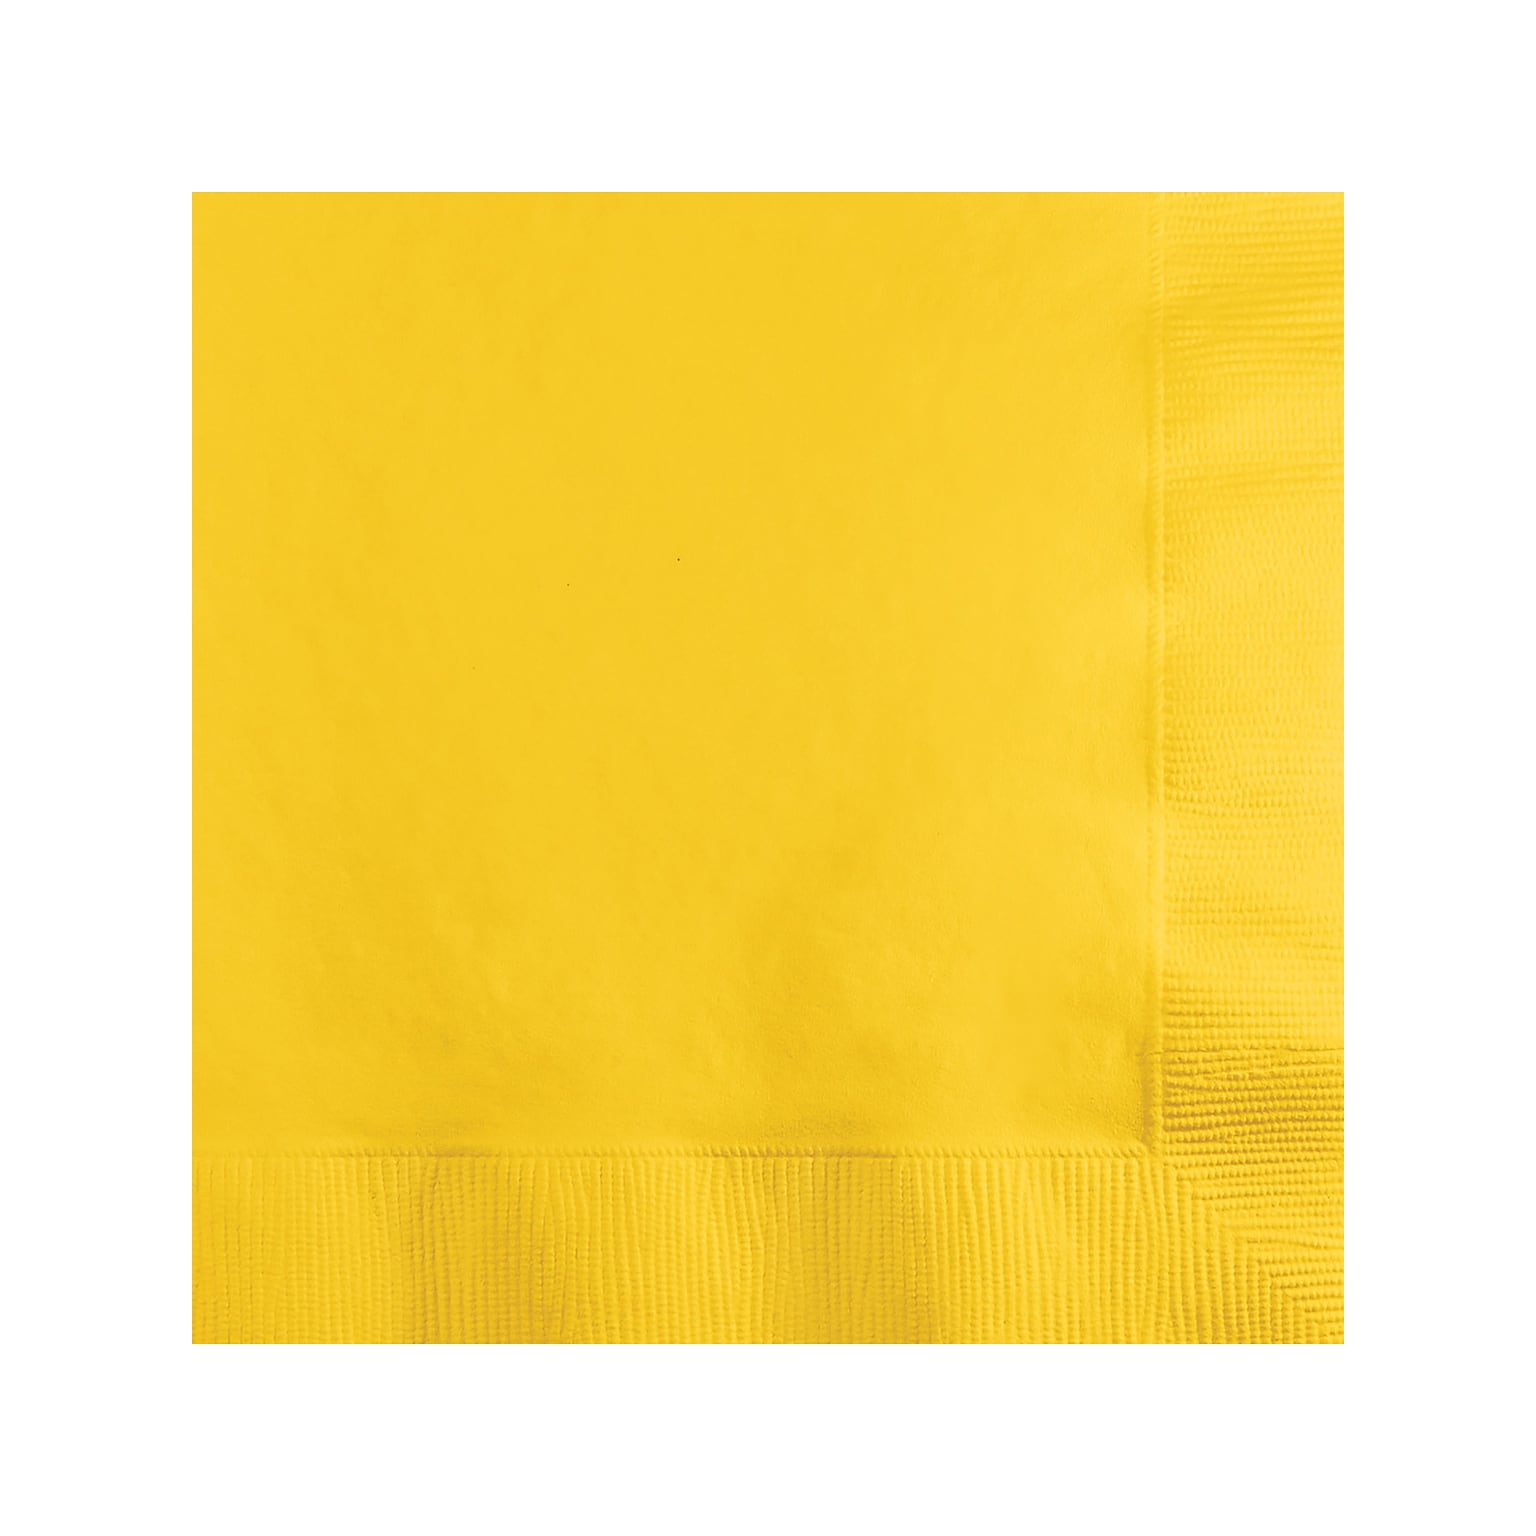 Creative Converting Touch of Color Beverage Napkin, 2-ply, School Bus Yellow, 150 Napkins/Pack (DTC801021BBNAP)